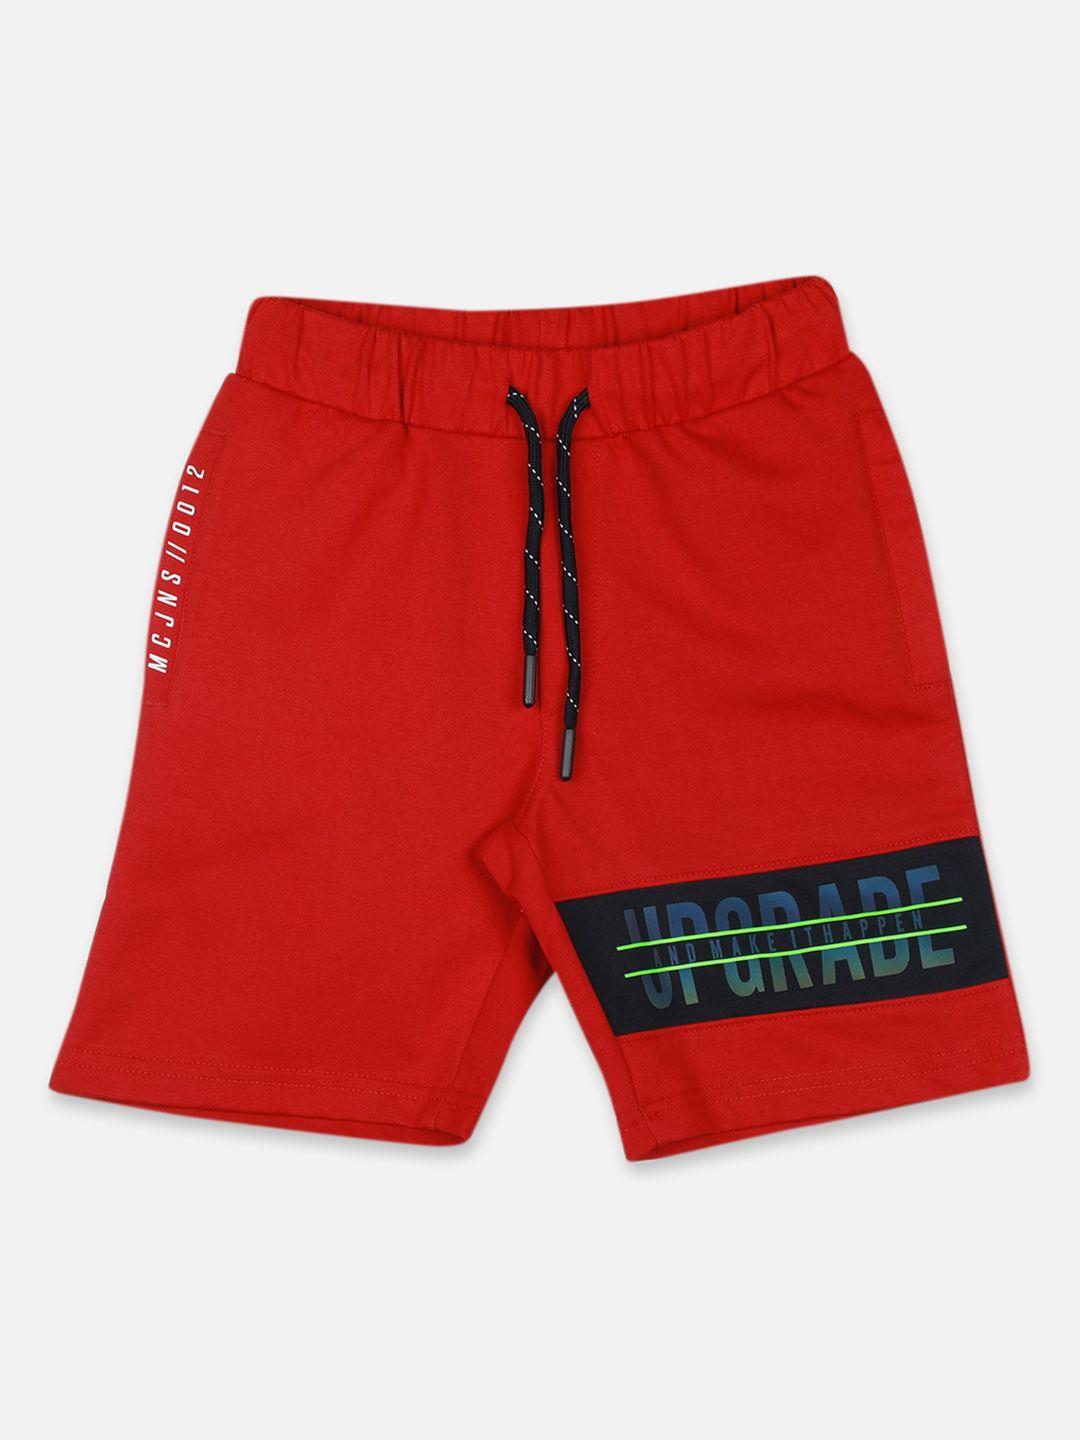 monte-carlo-boys-typography-printed-mid-rise-shorts